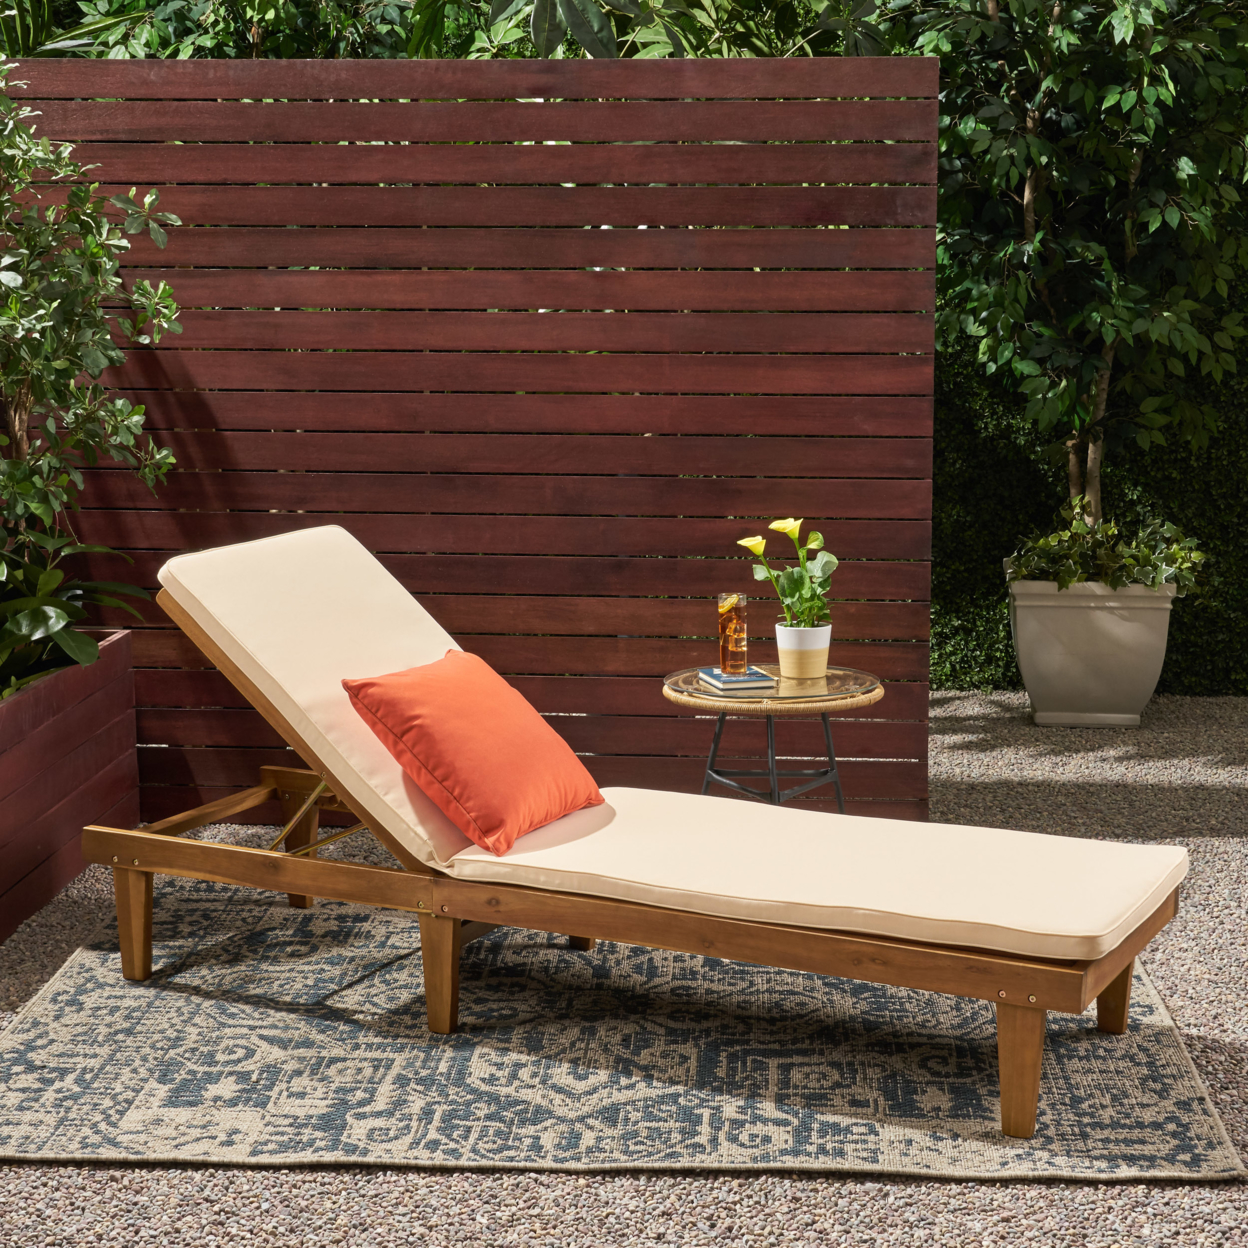 Yvette Outdoor Acacia Wood Chaise Lounge And Cushion Set - Gray Finish + Cream